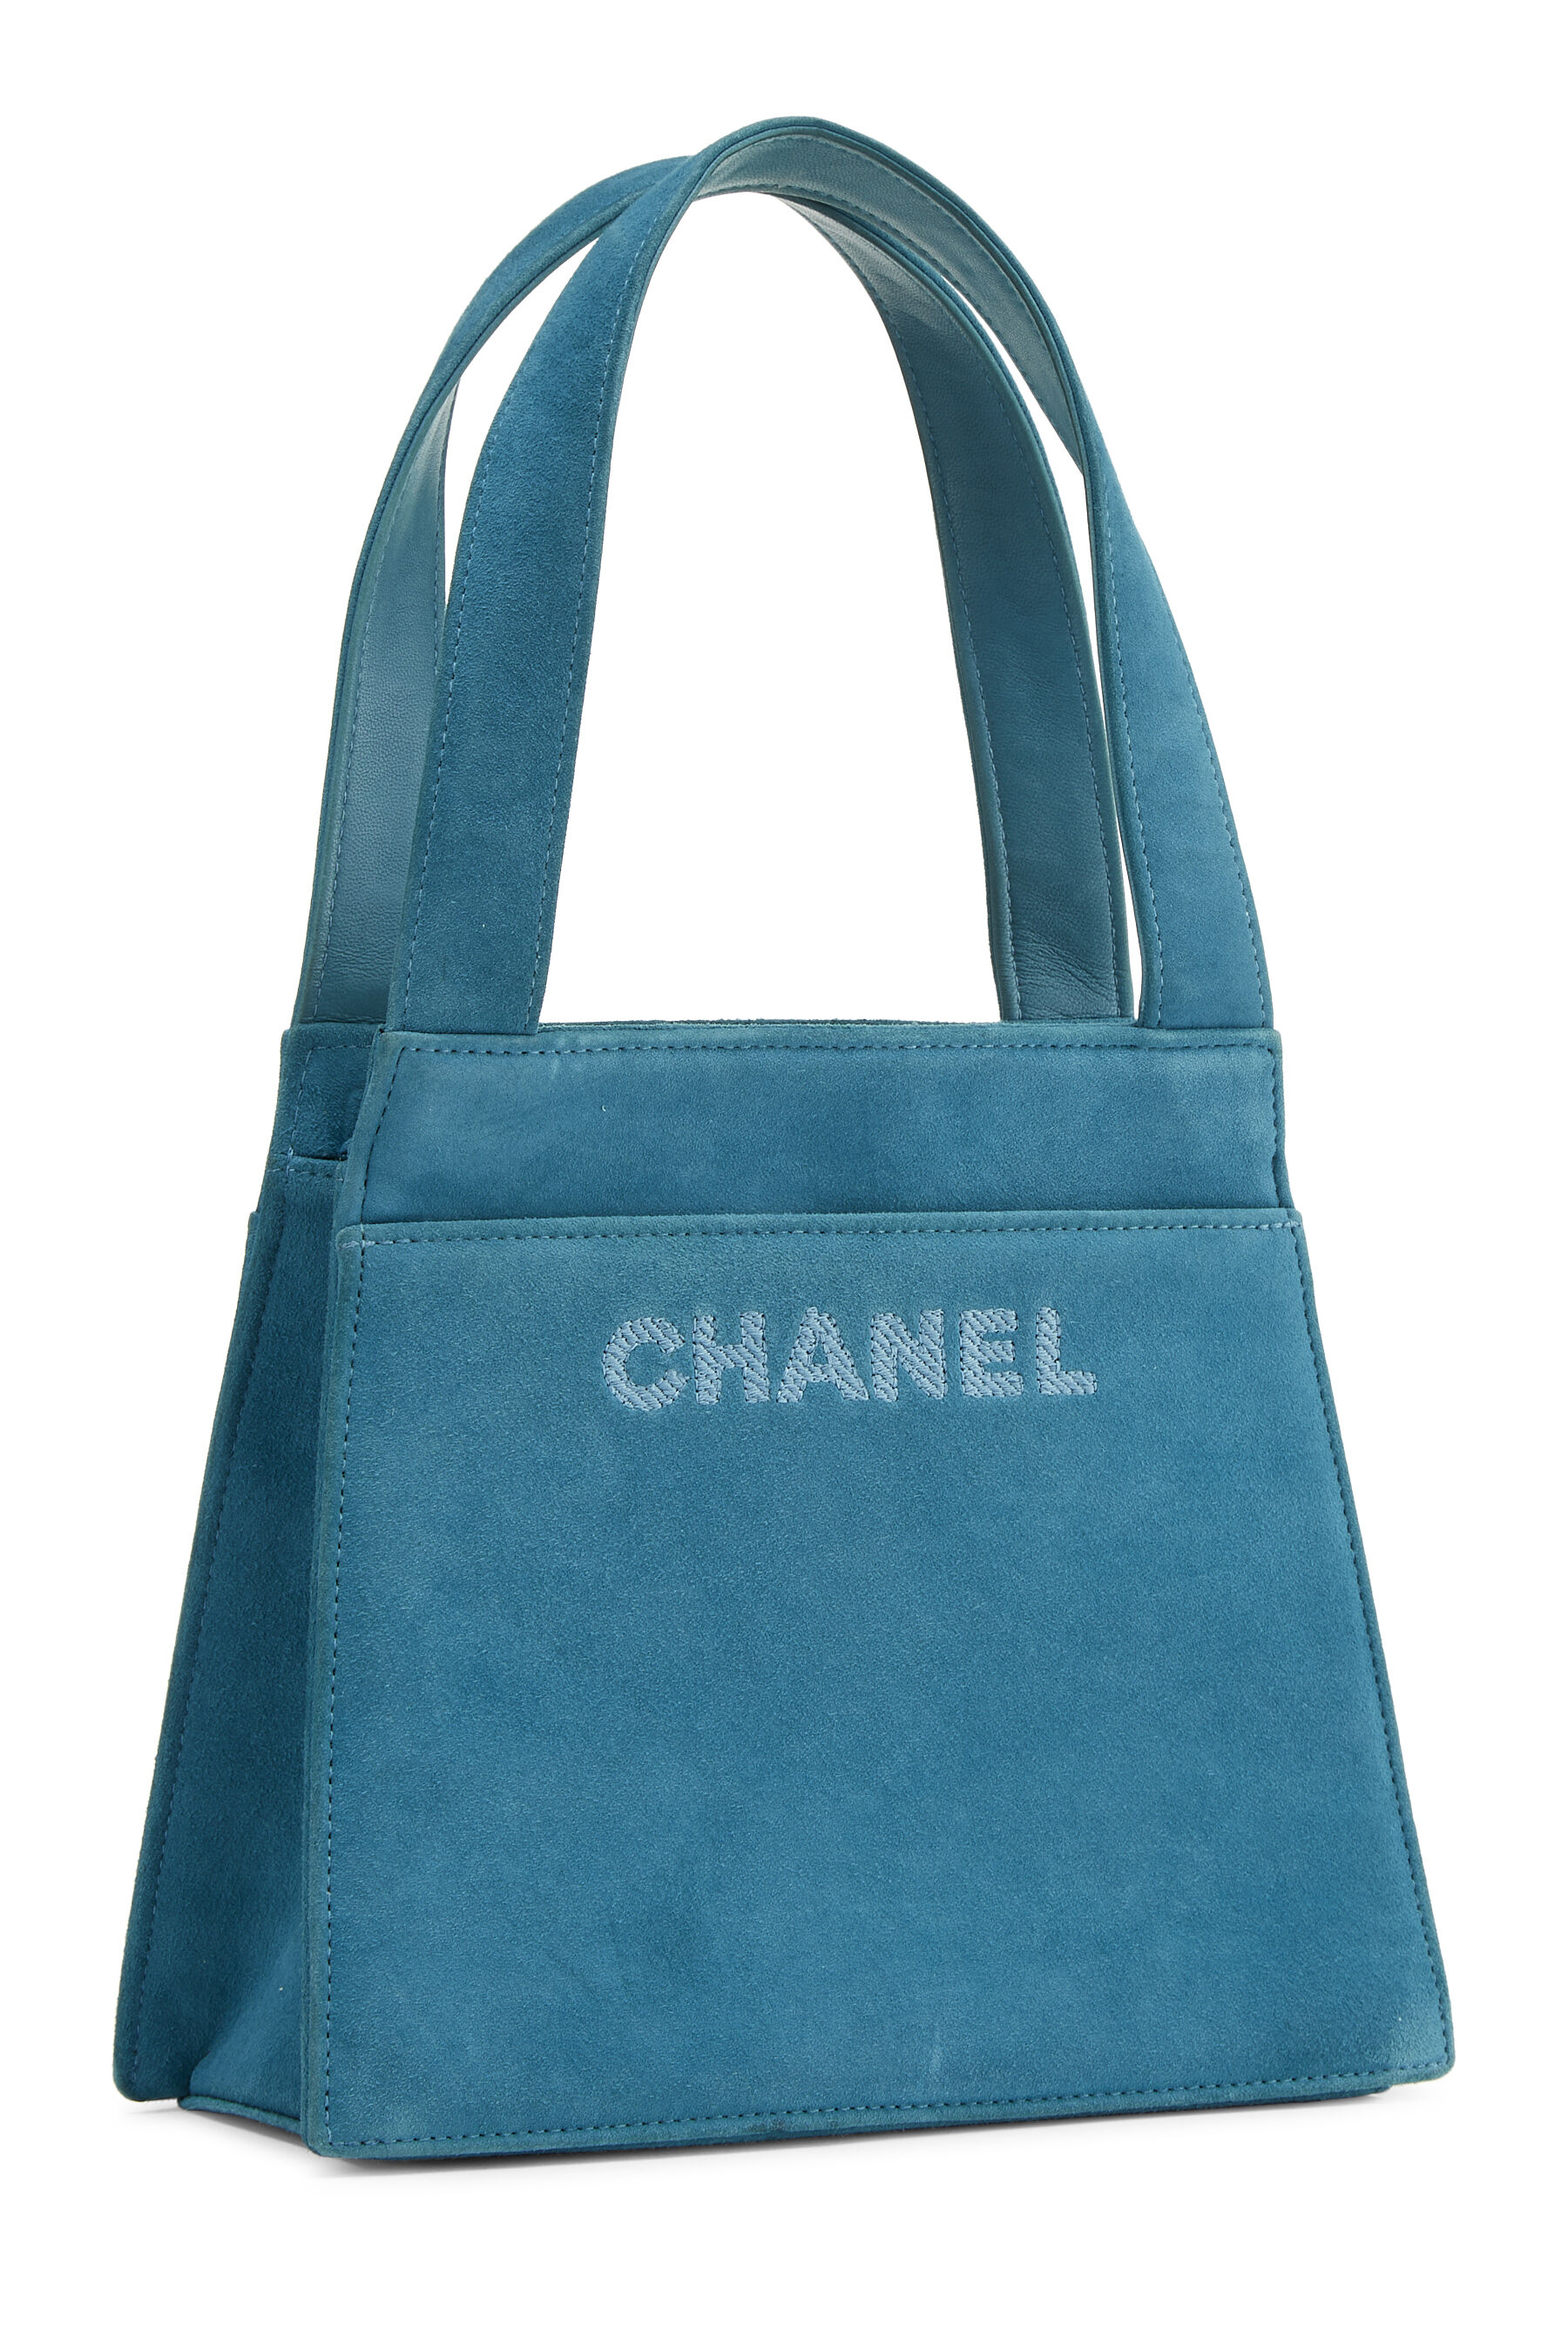 Snag the Latest CHANEL Blue Bags & Handbags for Women with Fast